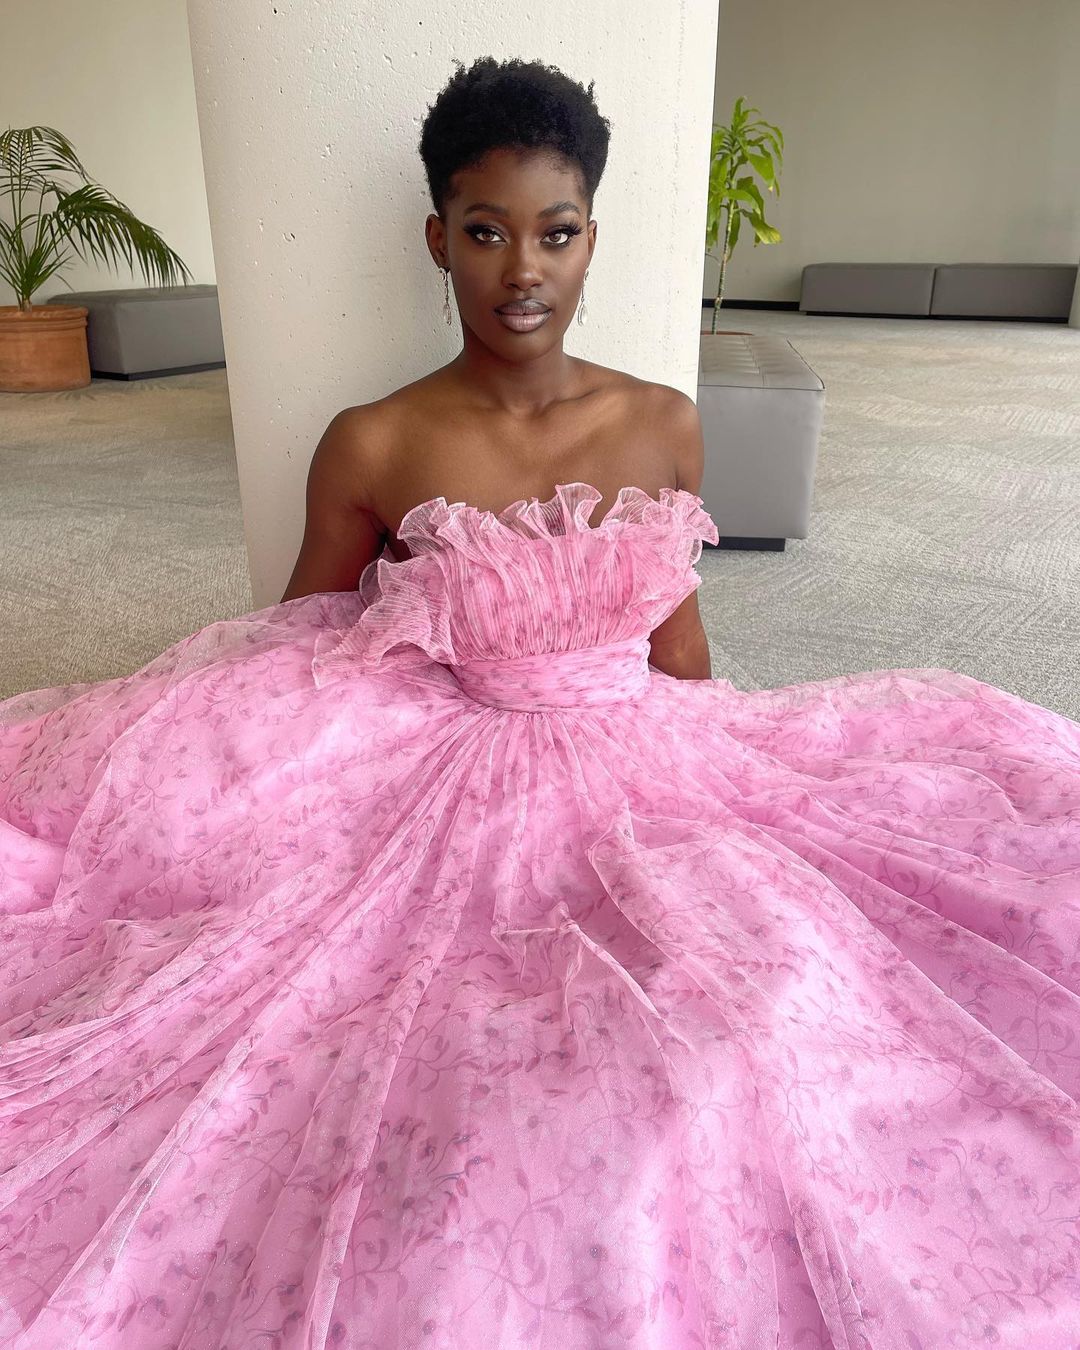 49 Beautiful Prom Dresses That'll Make You Everyone Say WOW